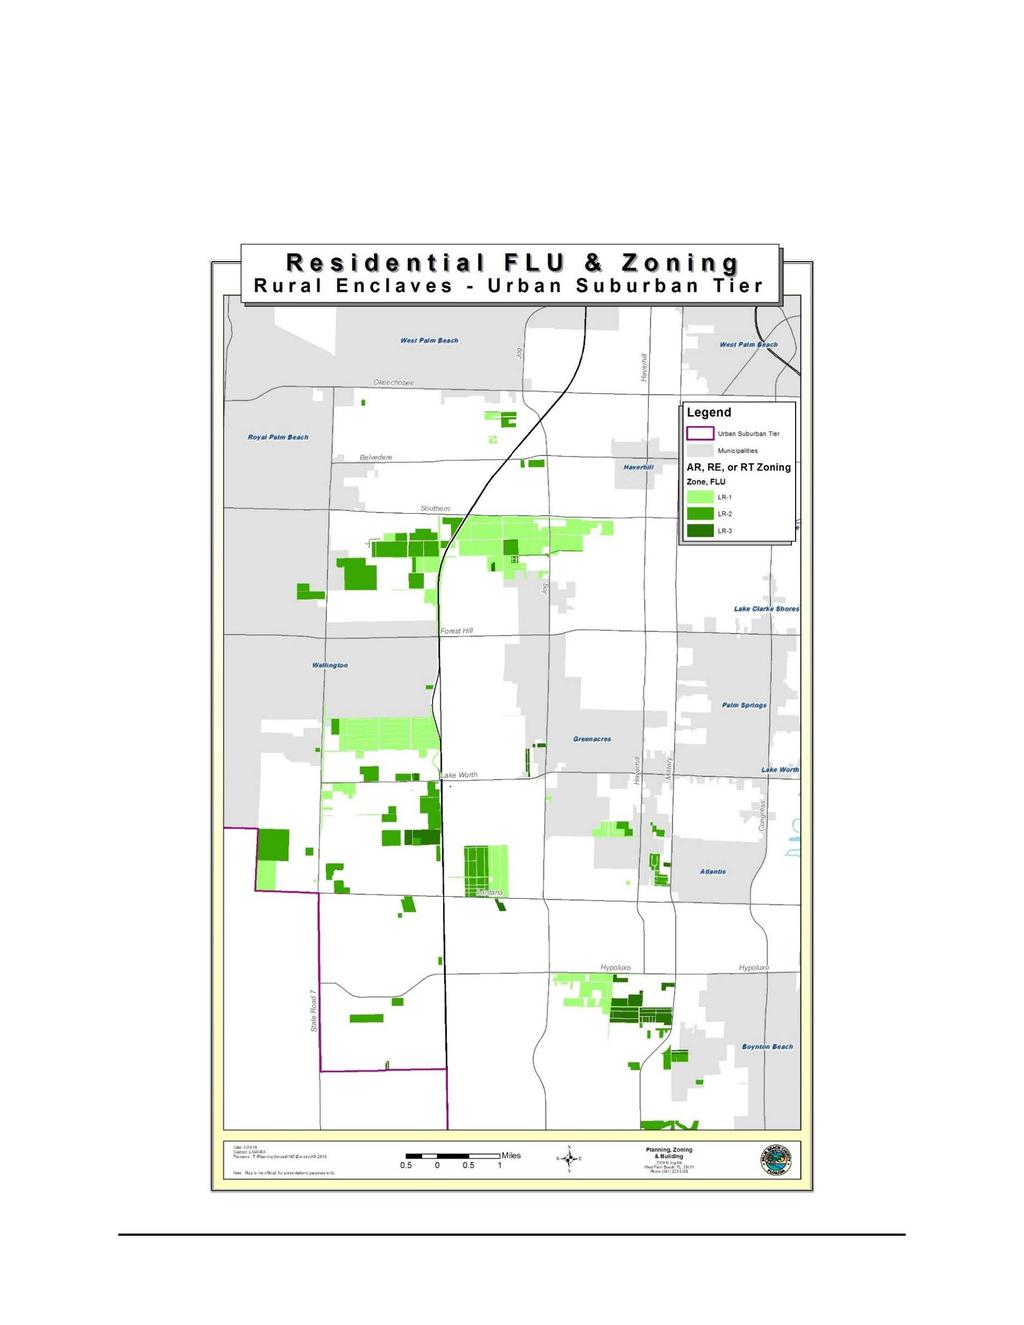 The map on the following page highlights the bulk of the rural enclaves in the Urban Suburban Tier east.